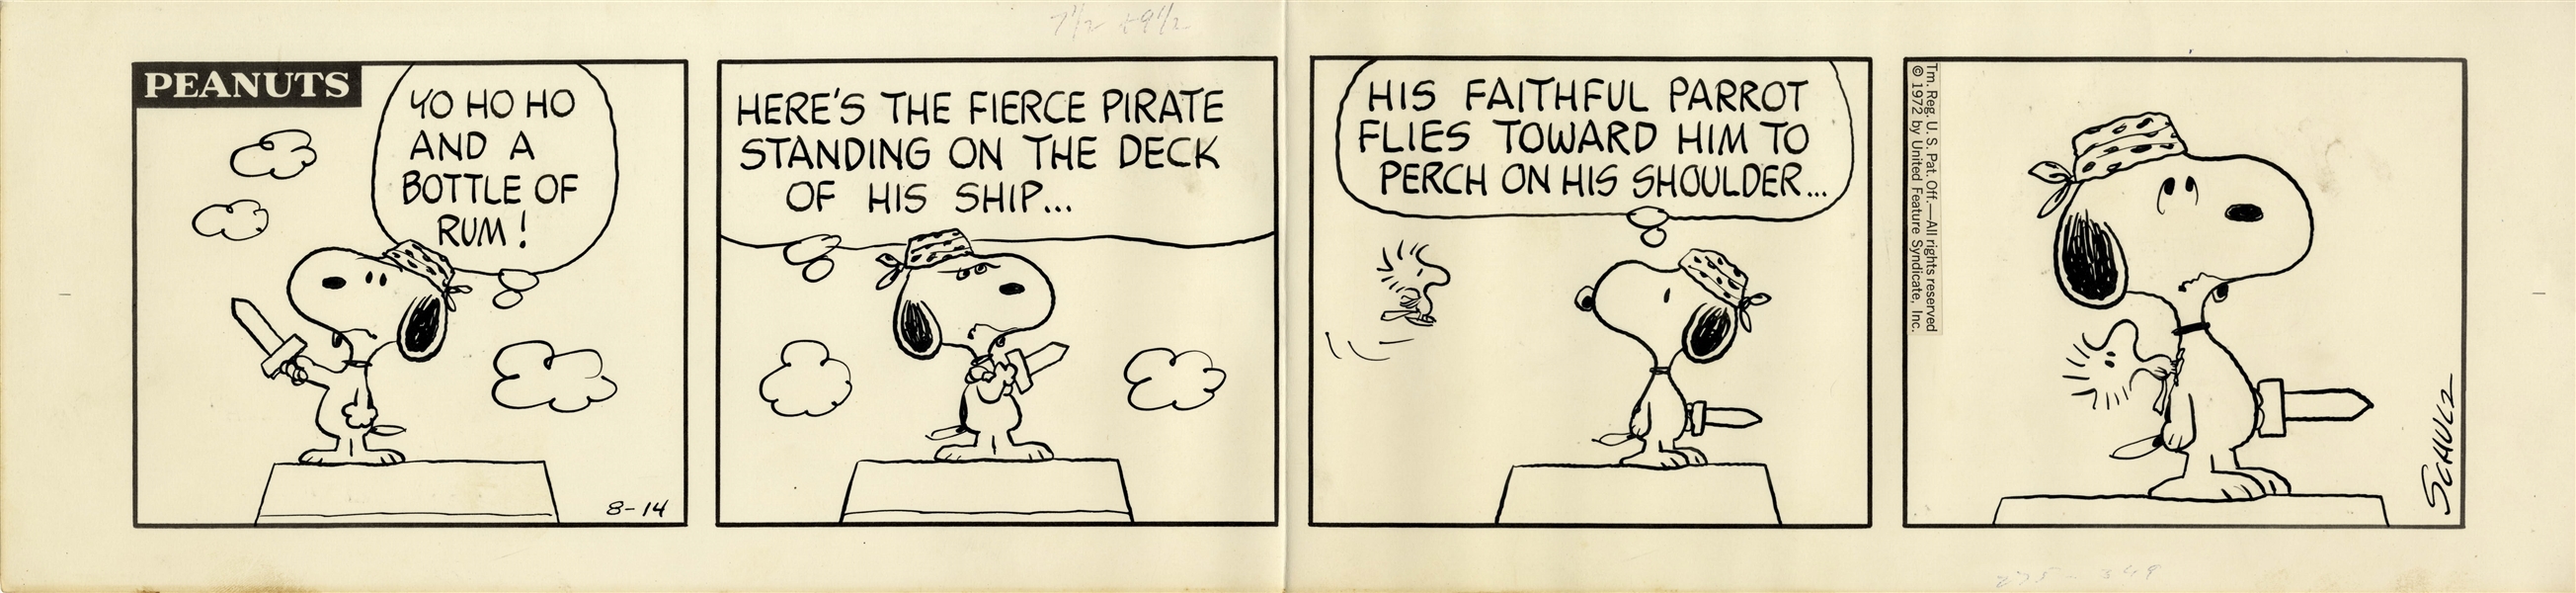 Snoopy Plays Pirate With Woodstock Helping in This 1972 Charles Schulz Hand-Drawn ''Peanuts'' Strip